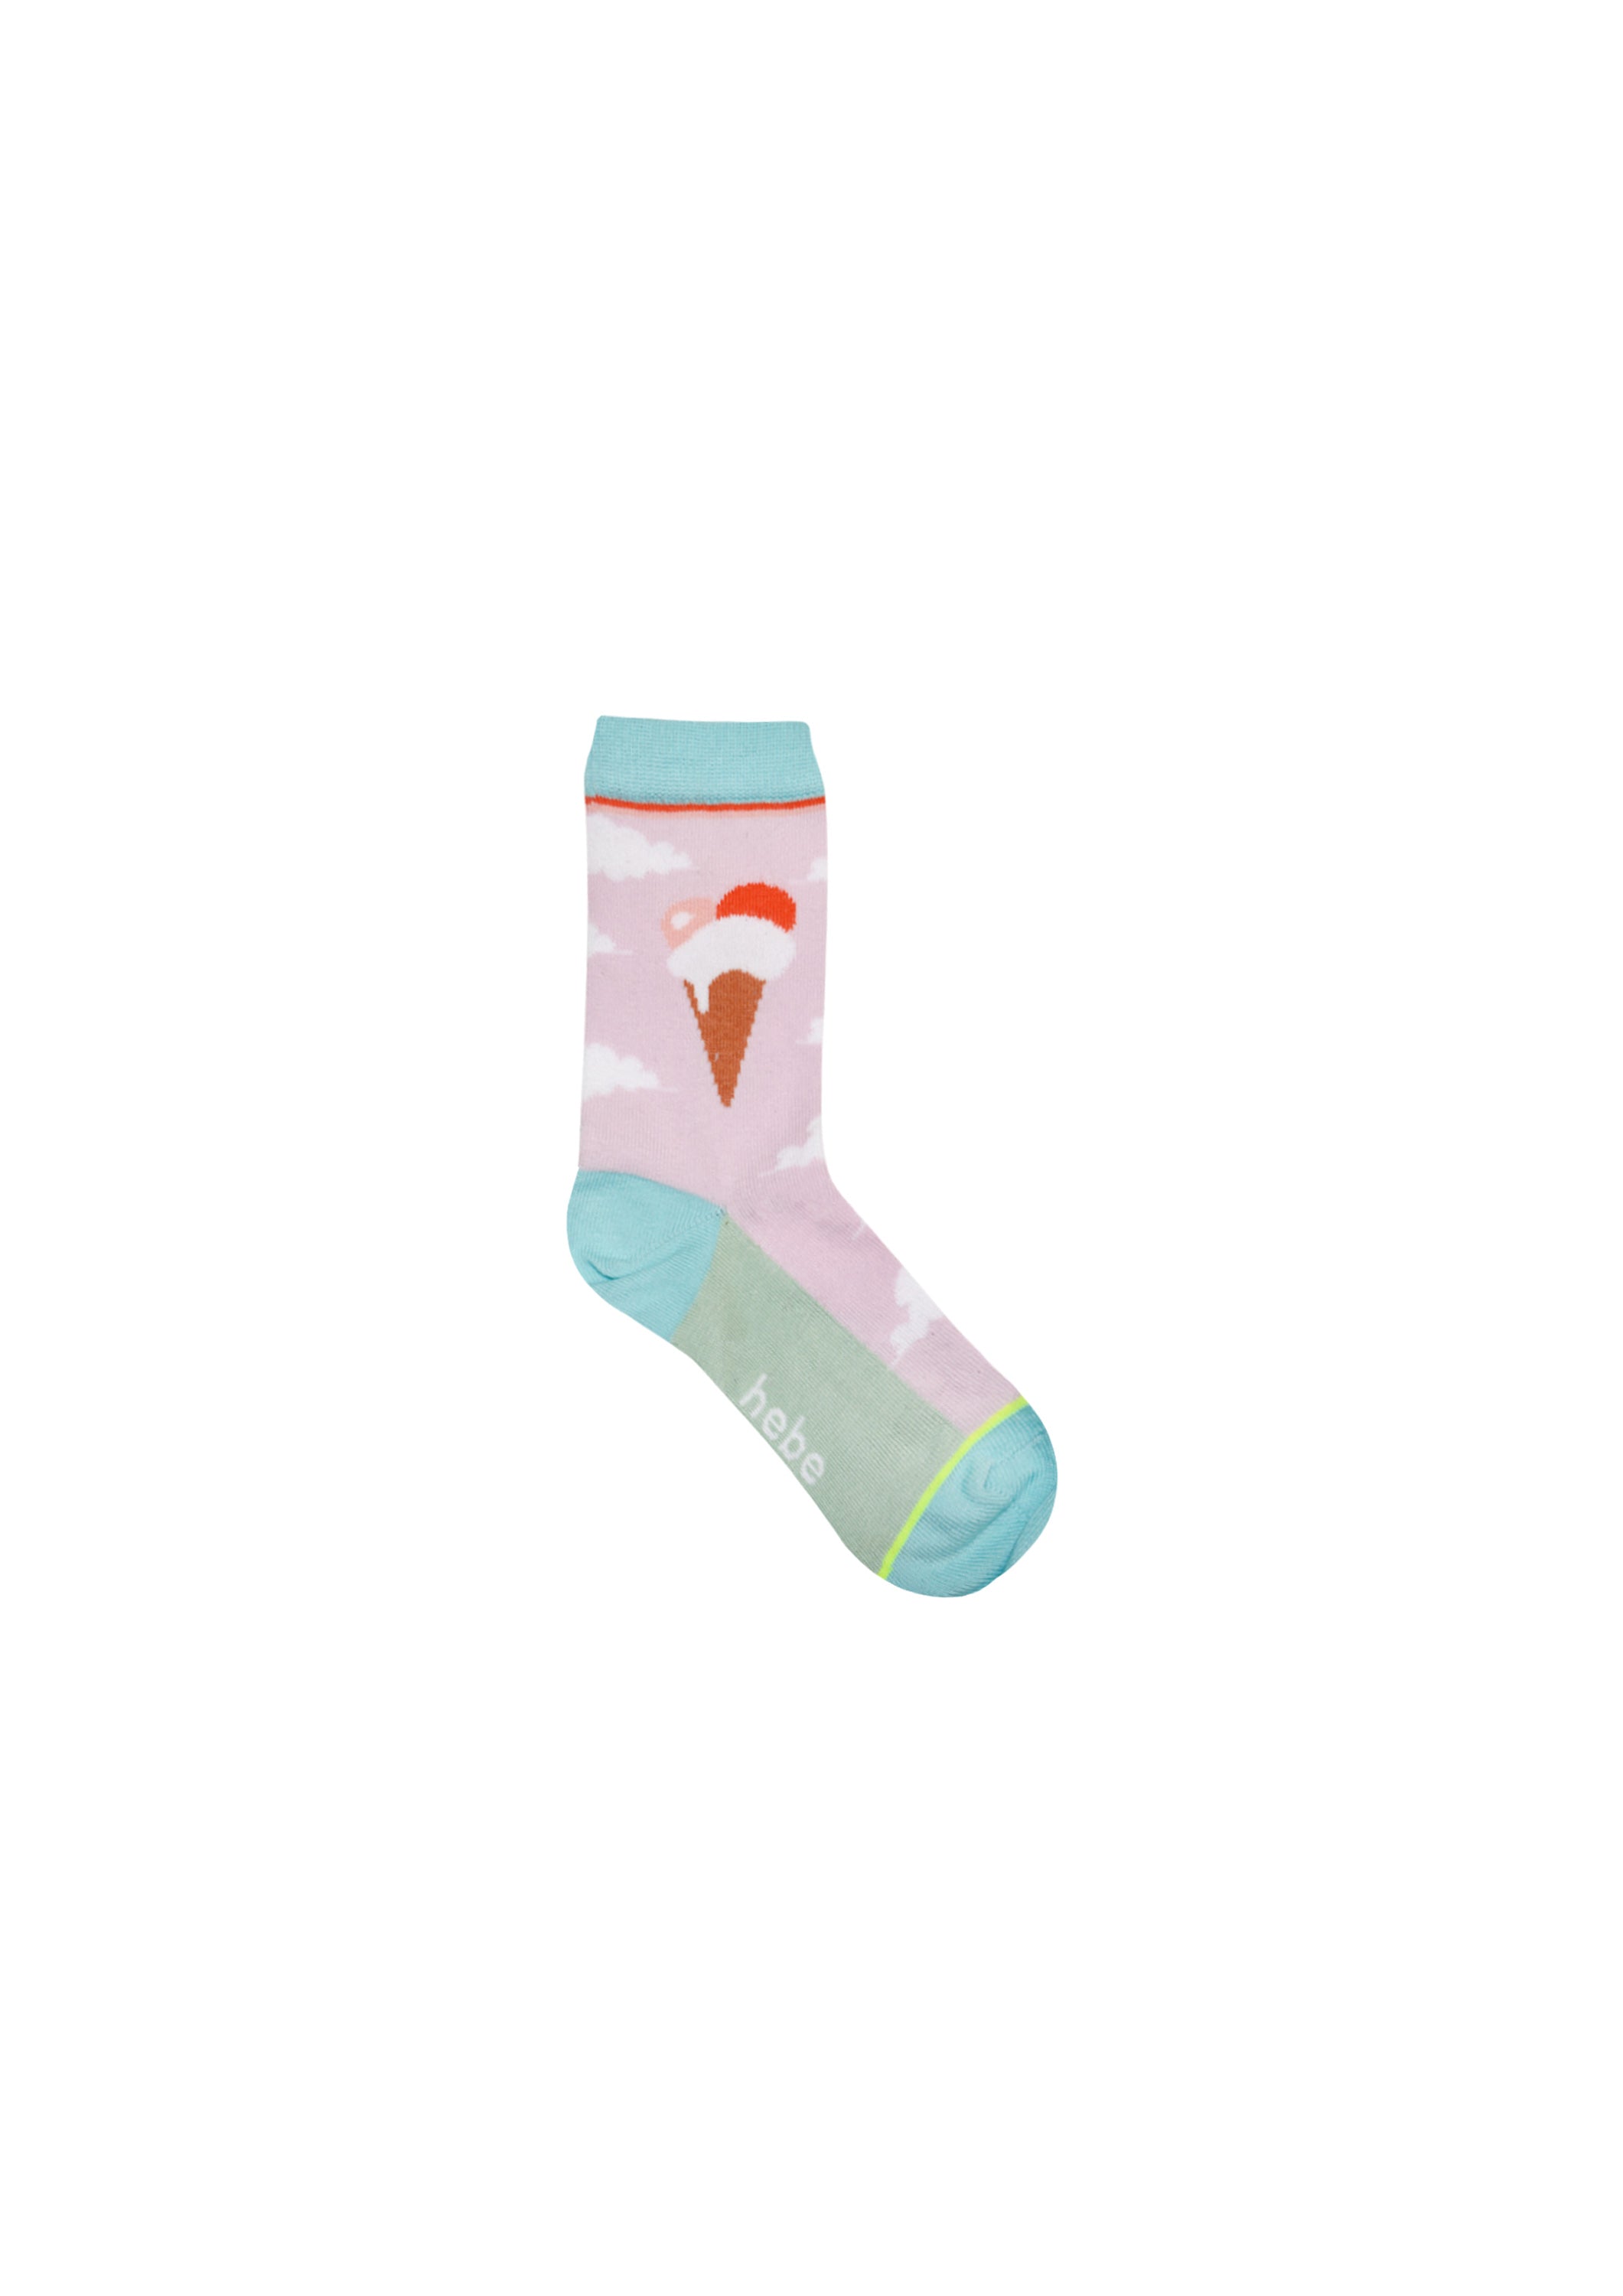 Lilac & Blue Ice Cream Socks - ONLY 2 LEFT